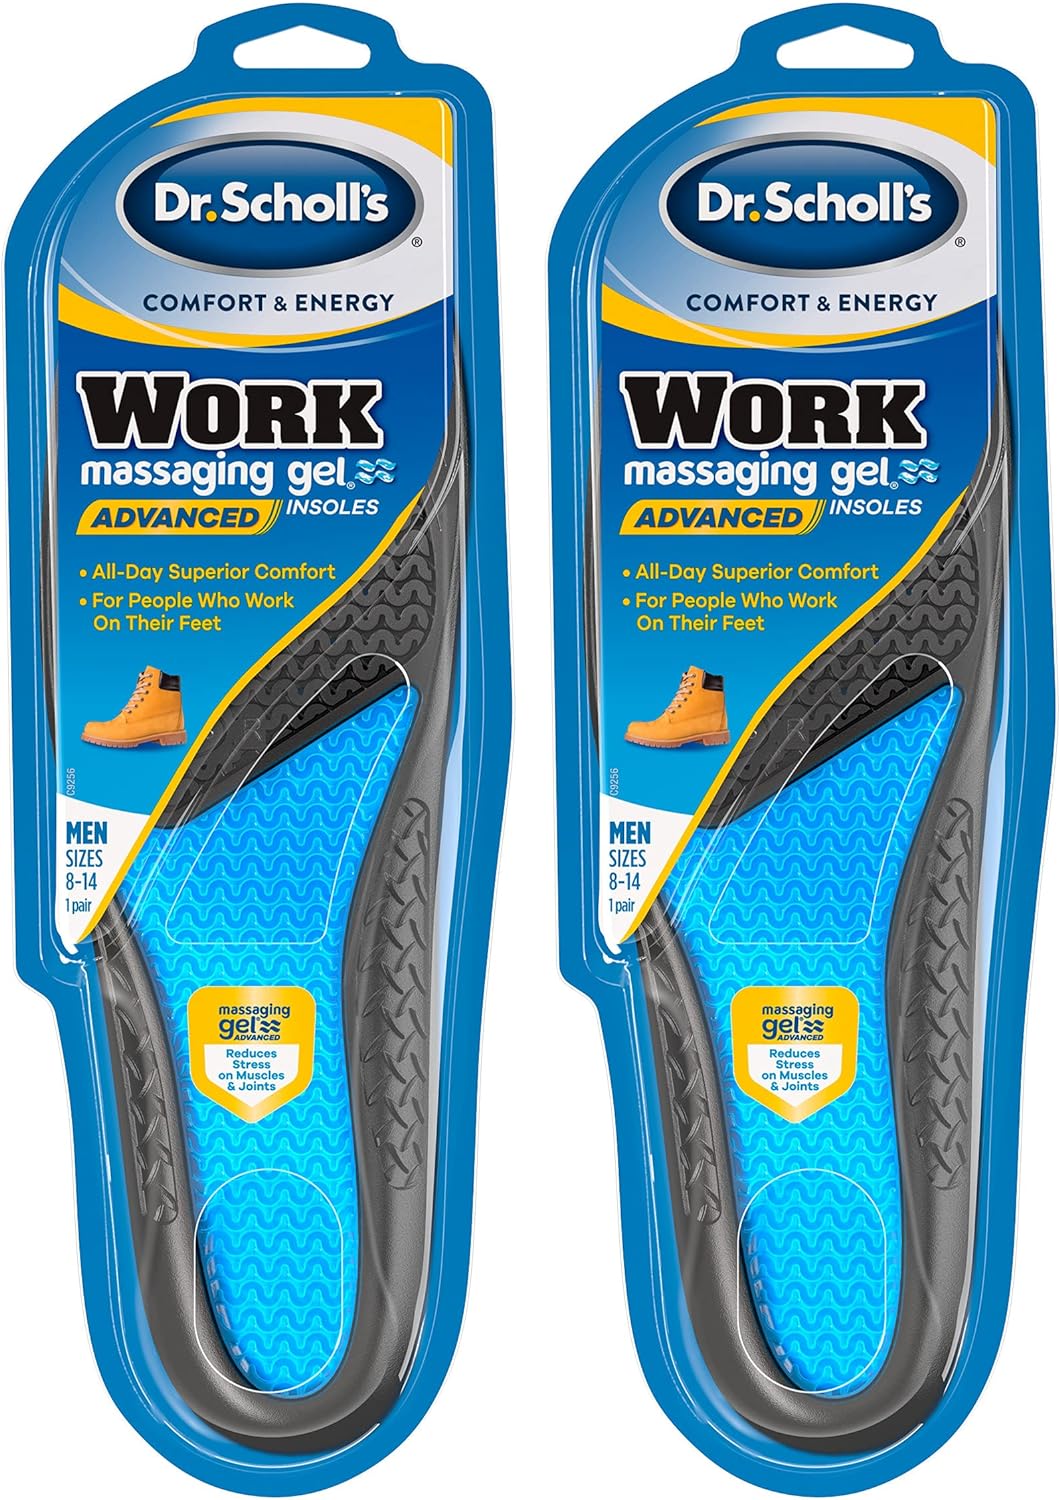 Dr. Scholls Work Insoles (Pack) // All-Day Shock Absorption and Reinforced Arch Support That Fits in Work Boots and More (for Mens 8-14, Also Available for Womens 6-10) 1 Pair (Pack of 2) 2 Count